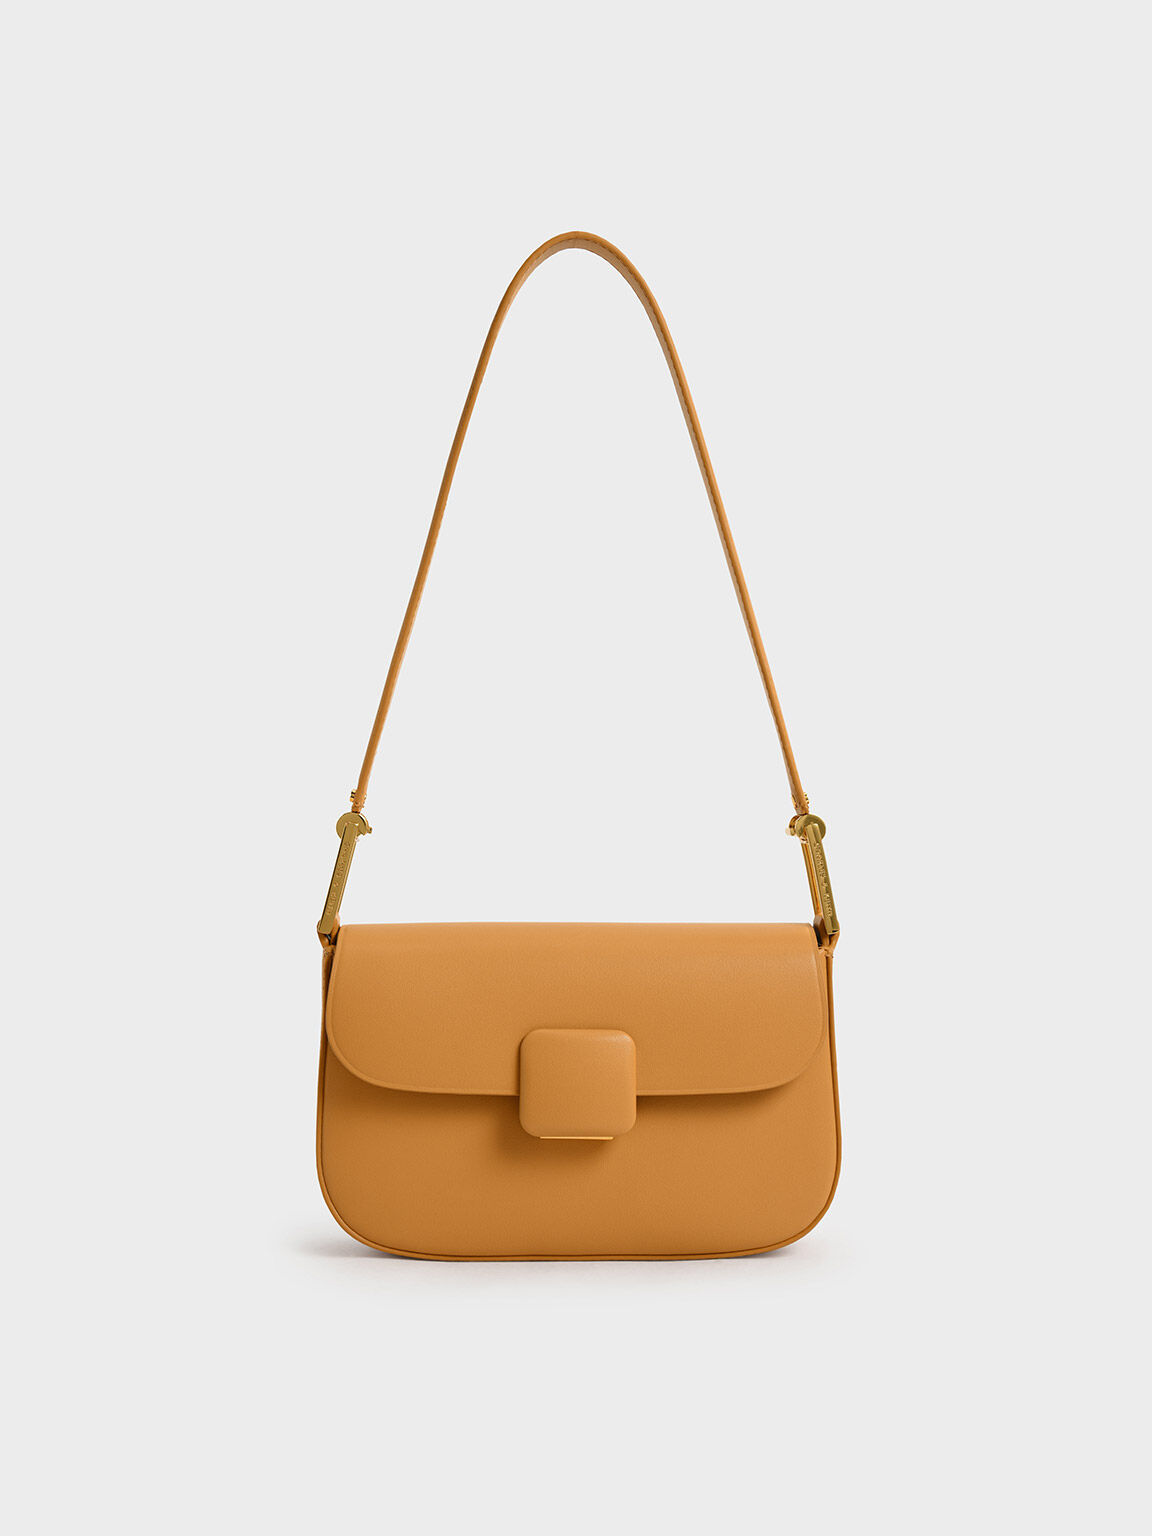 The Koa: All About The Iconic Shoulder Bag - CHARLES & KEITH US